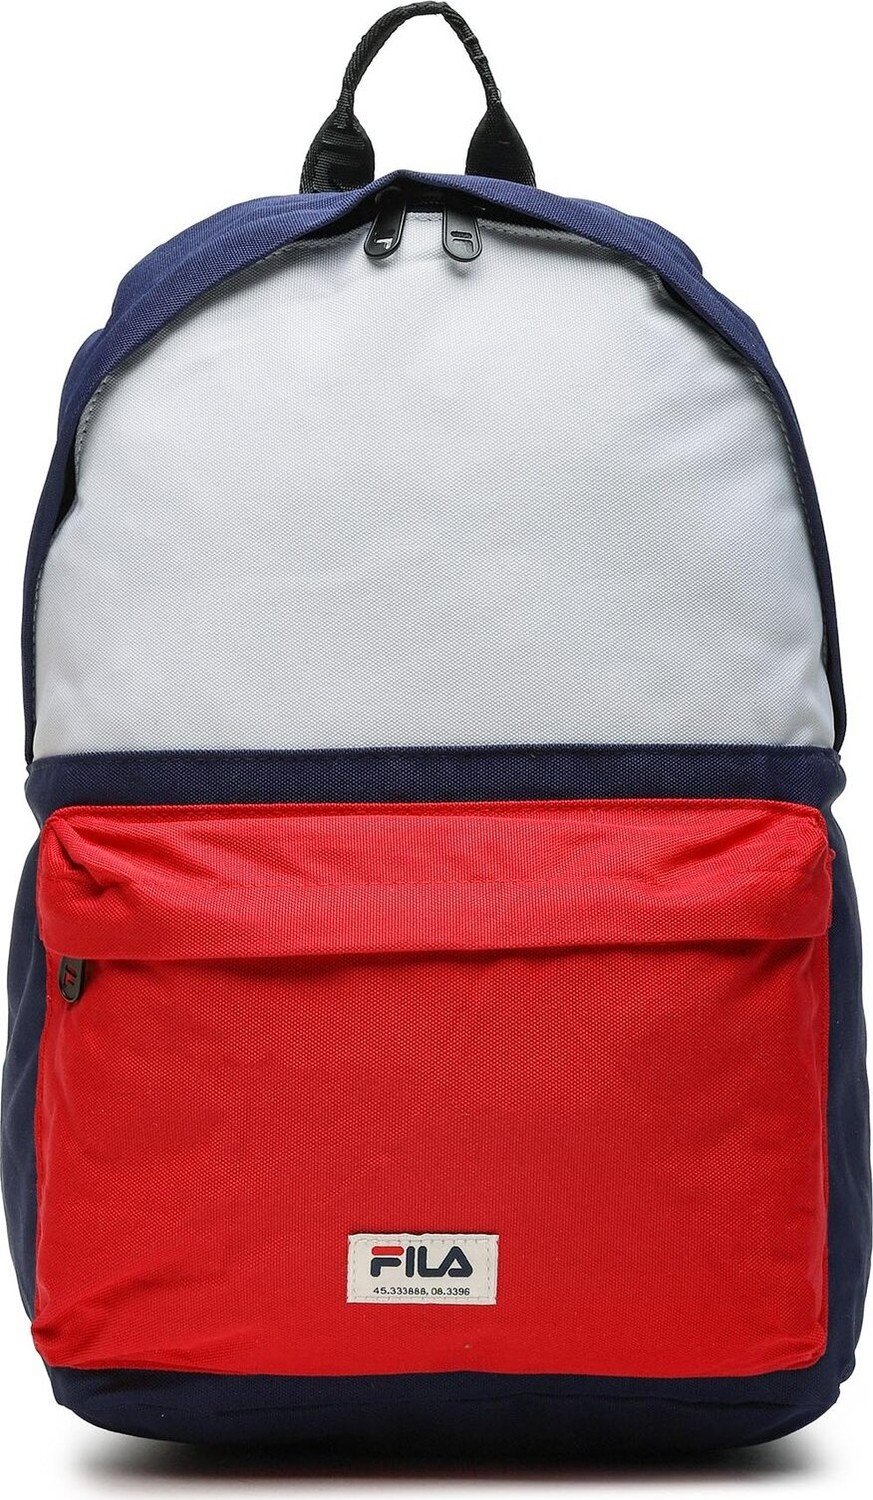 Batoh Fila Boma Badge Backpack S’Cool Two FBU0079 Medieval Blue/Bright White/True Red 53007